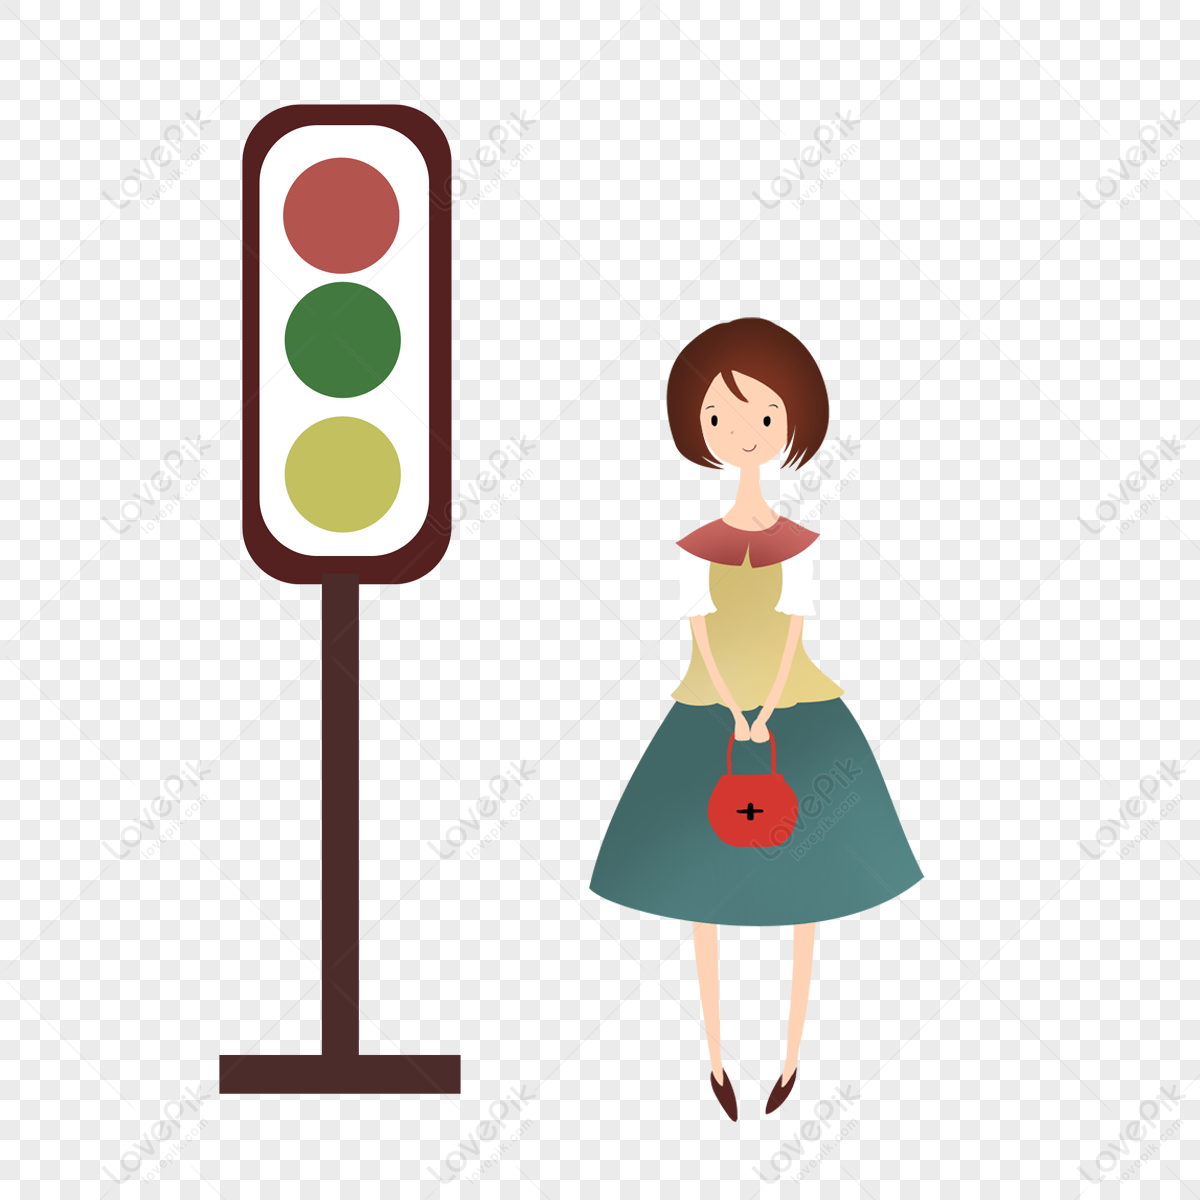 The Girl Waiting For Green Light PNG Image And Clipart Image For Download - Lovepik |